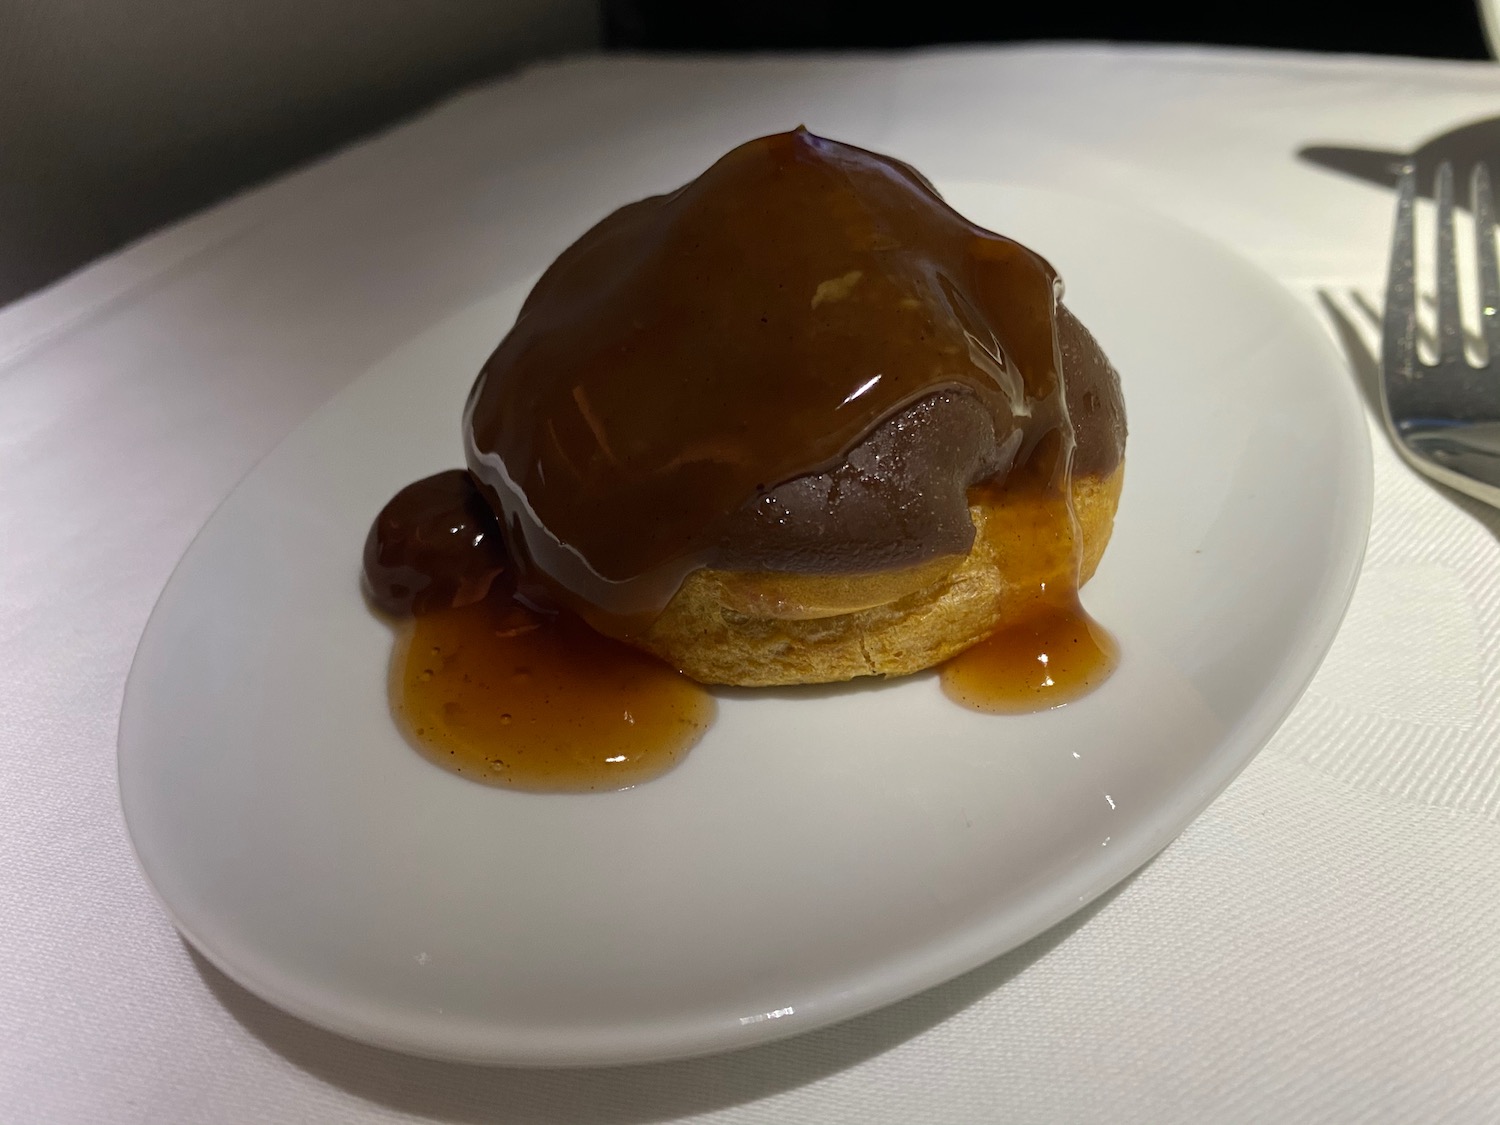 a pastry with brown sauce on a white plate